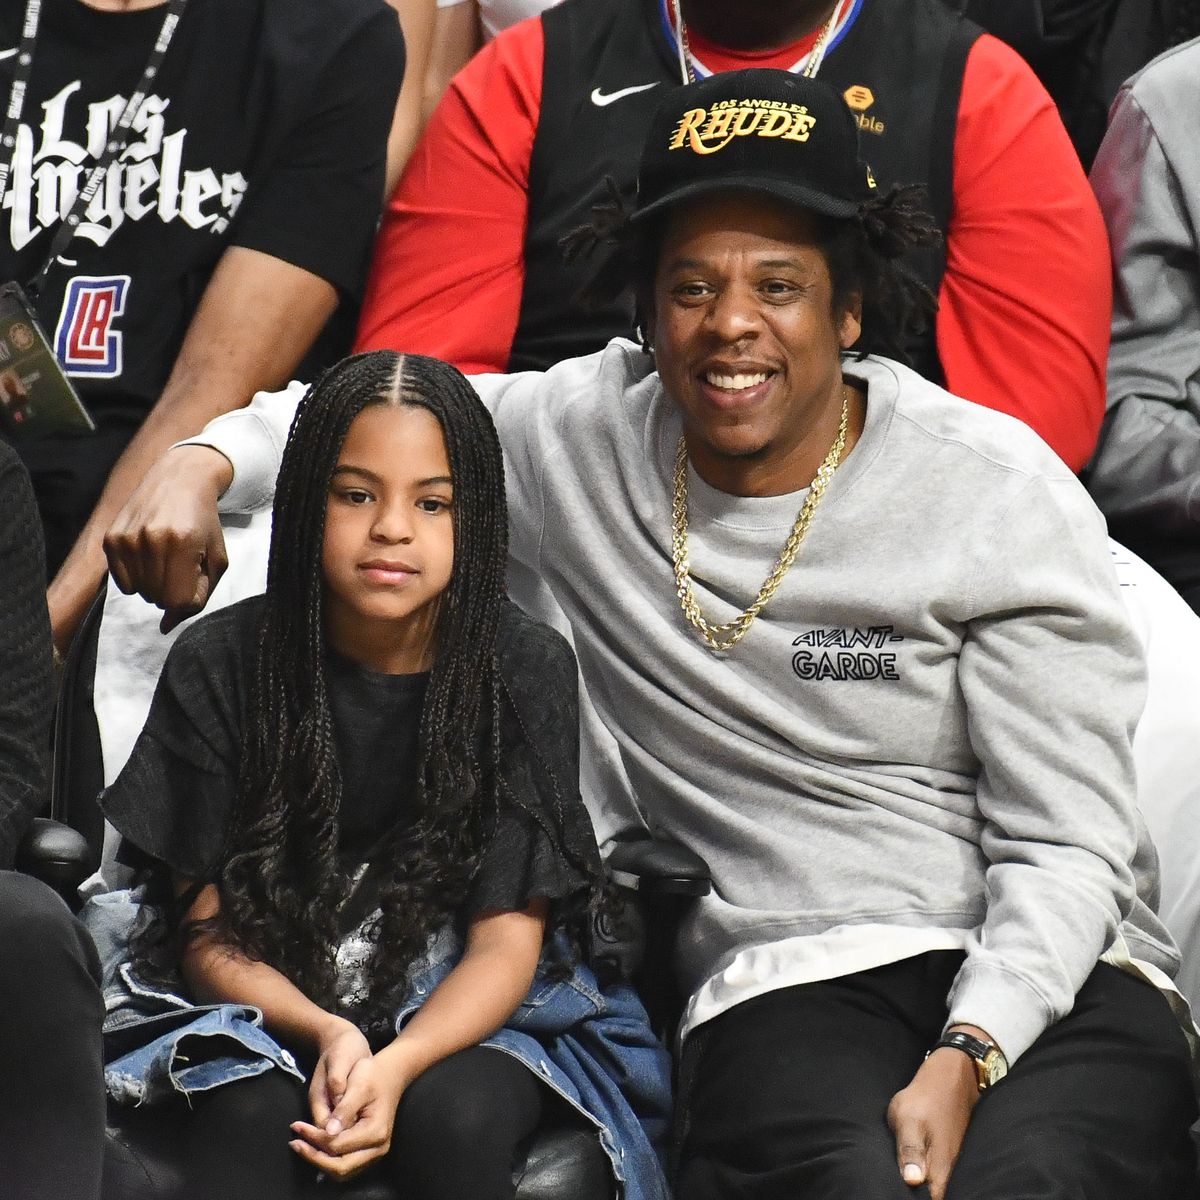 Blue Ivy Carter Helped of the Induct Her Fame Hall Jay-Z Into